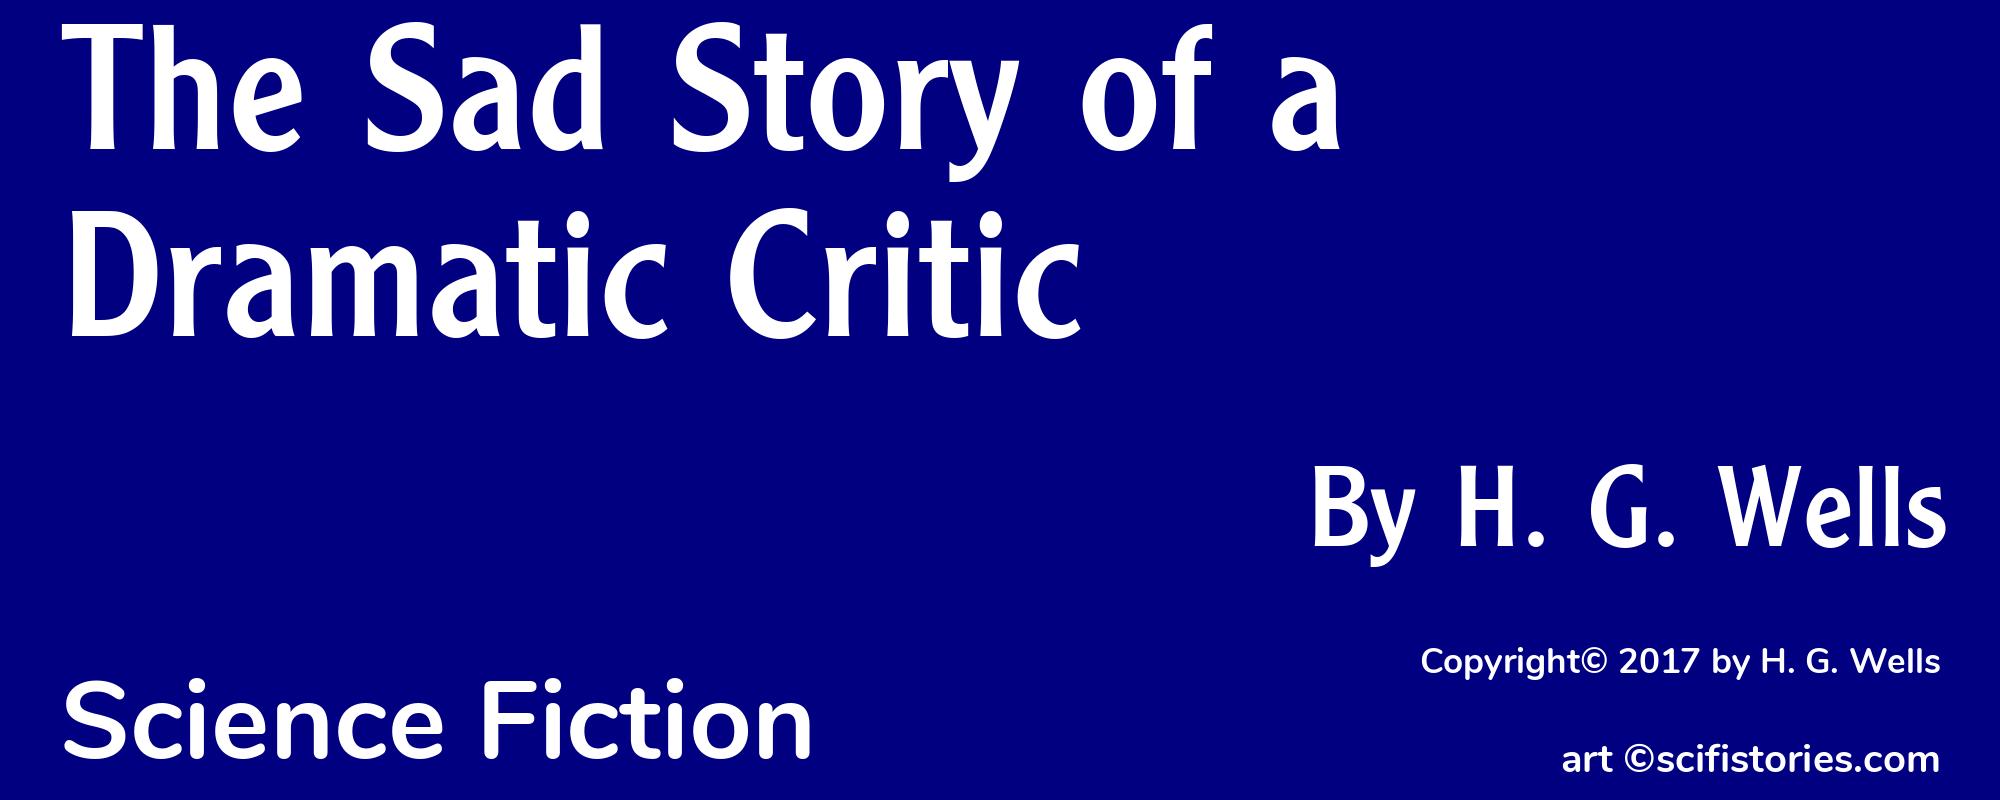 The Sad Story of a Dramatic Critic - Cover